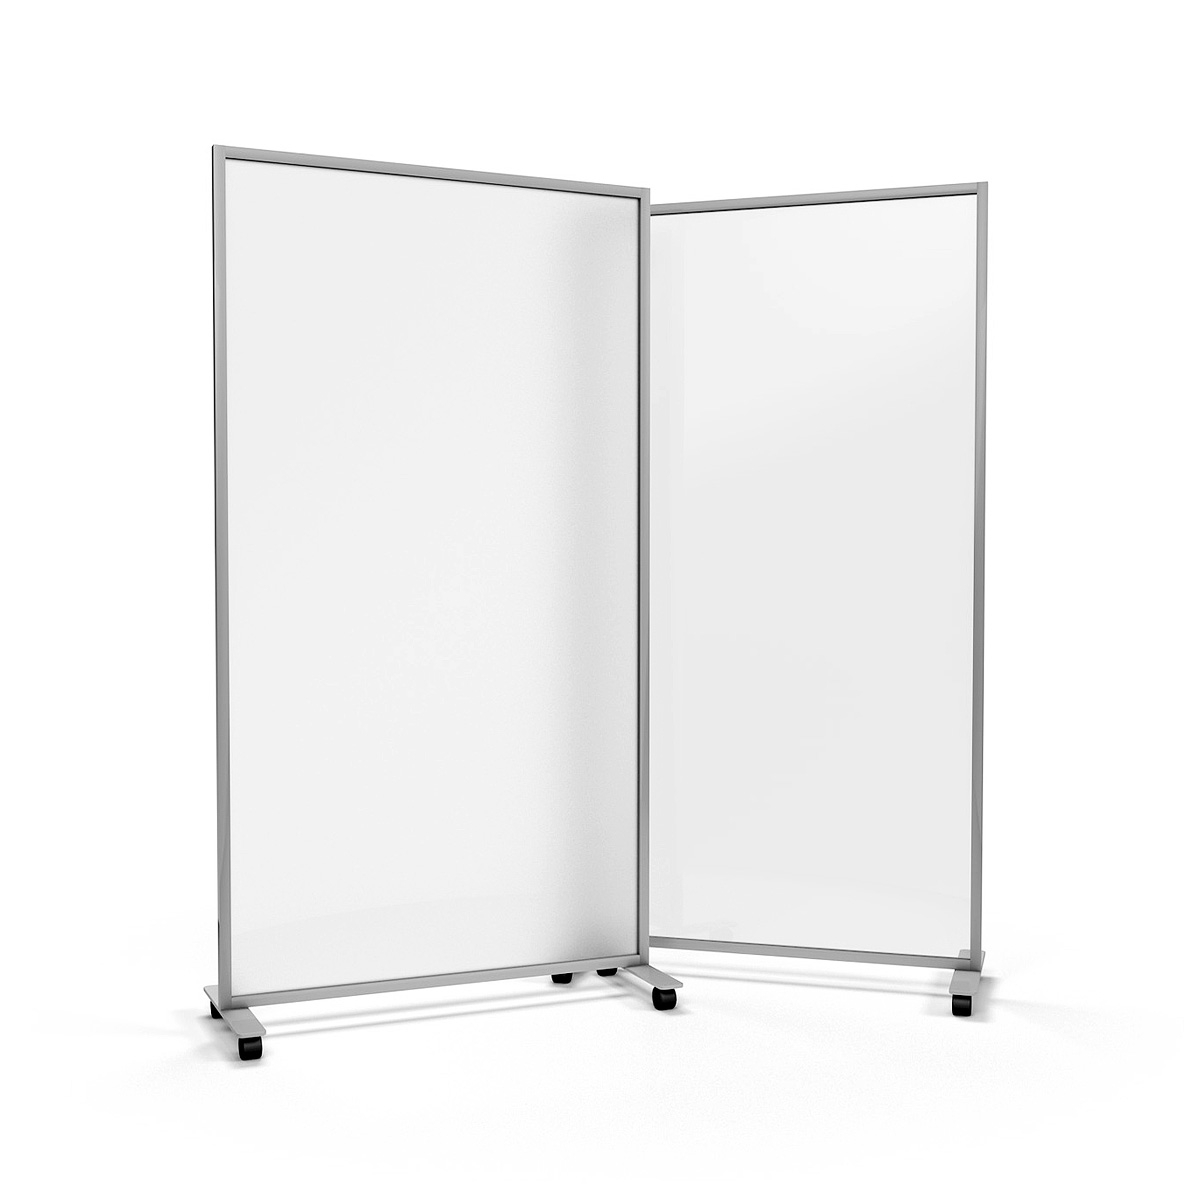 ACHOO Frosted Perspex Glass Office Divider on Wheels